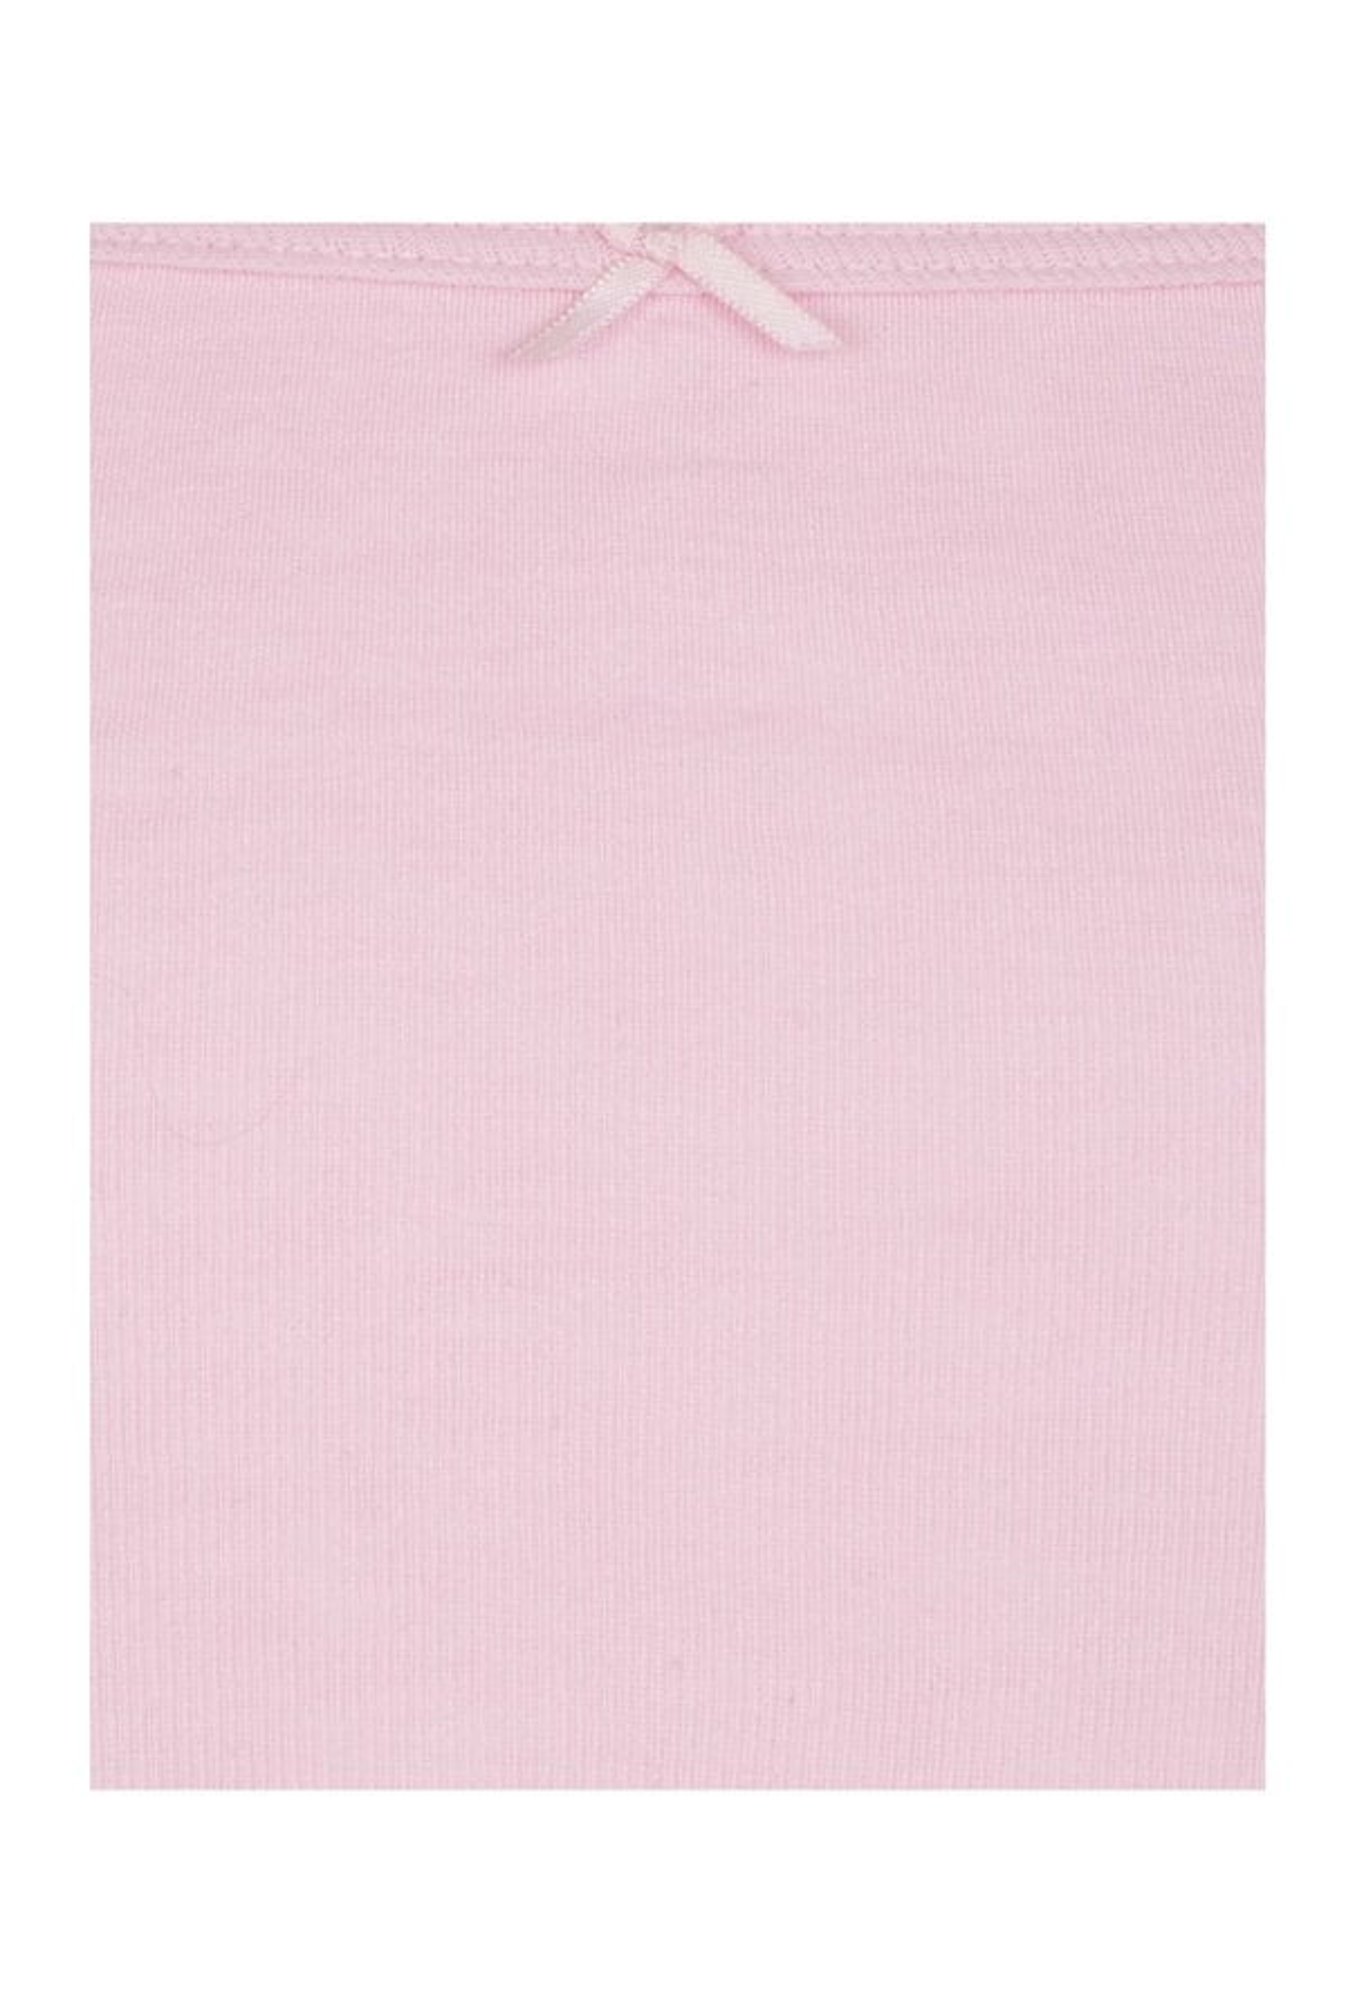 Buy Jockey Pink Solid Camisole - SG04 for Girls Clothing Online @ Tata CLiQ